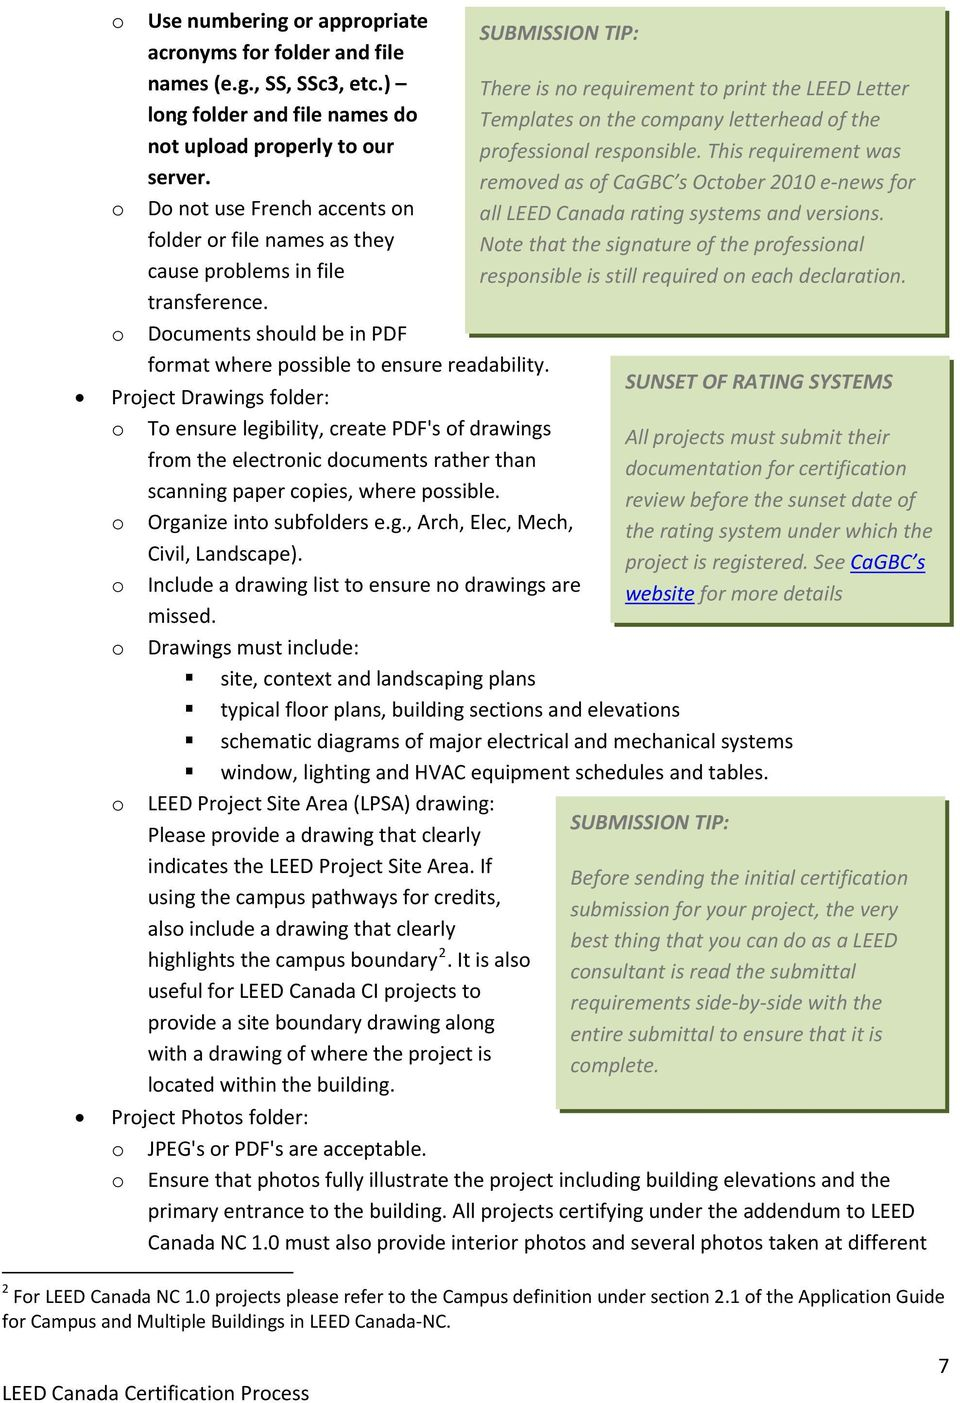 Leed Canada Certification Process For Leed Canada Nc, Cs, Ci Inside Leed Letter Template